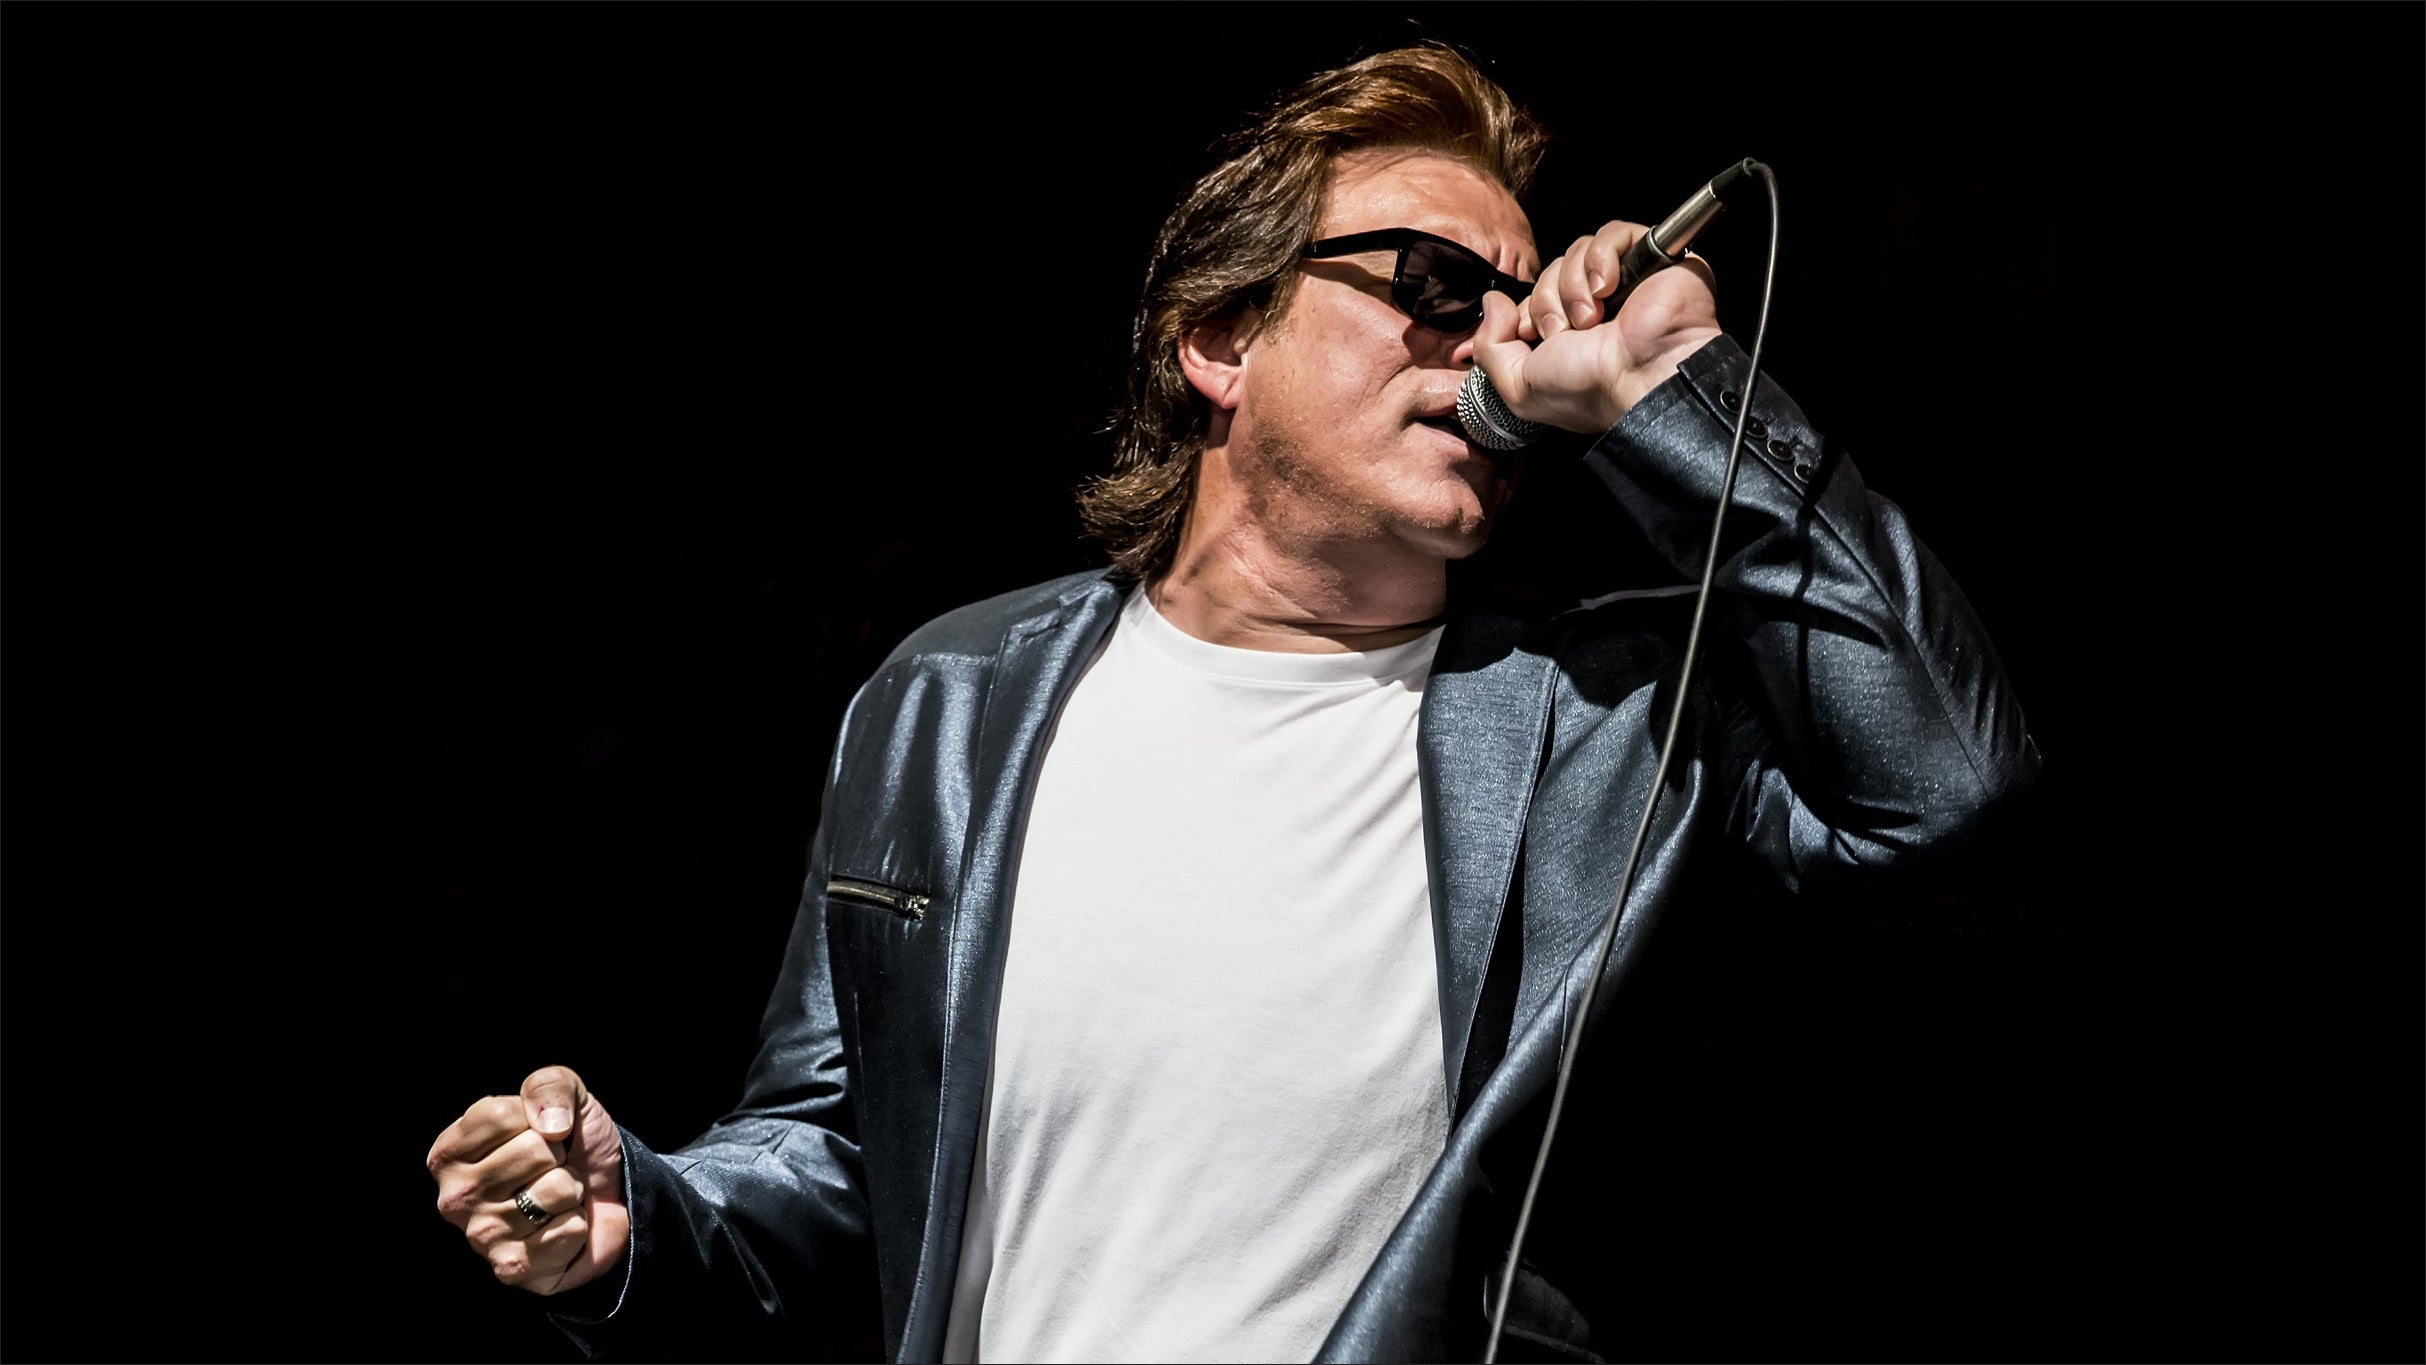 The Heart Of Rock & Roll - A Tribute To Huey Lewis & The News in Huntington promo photo for Citi® Cardmember presale offer code